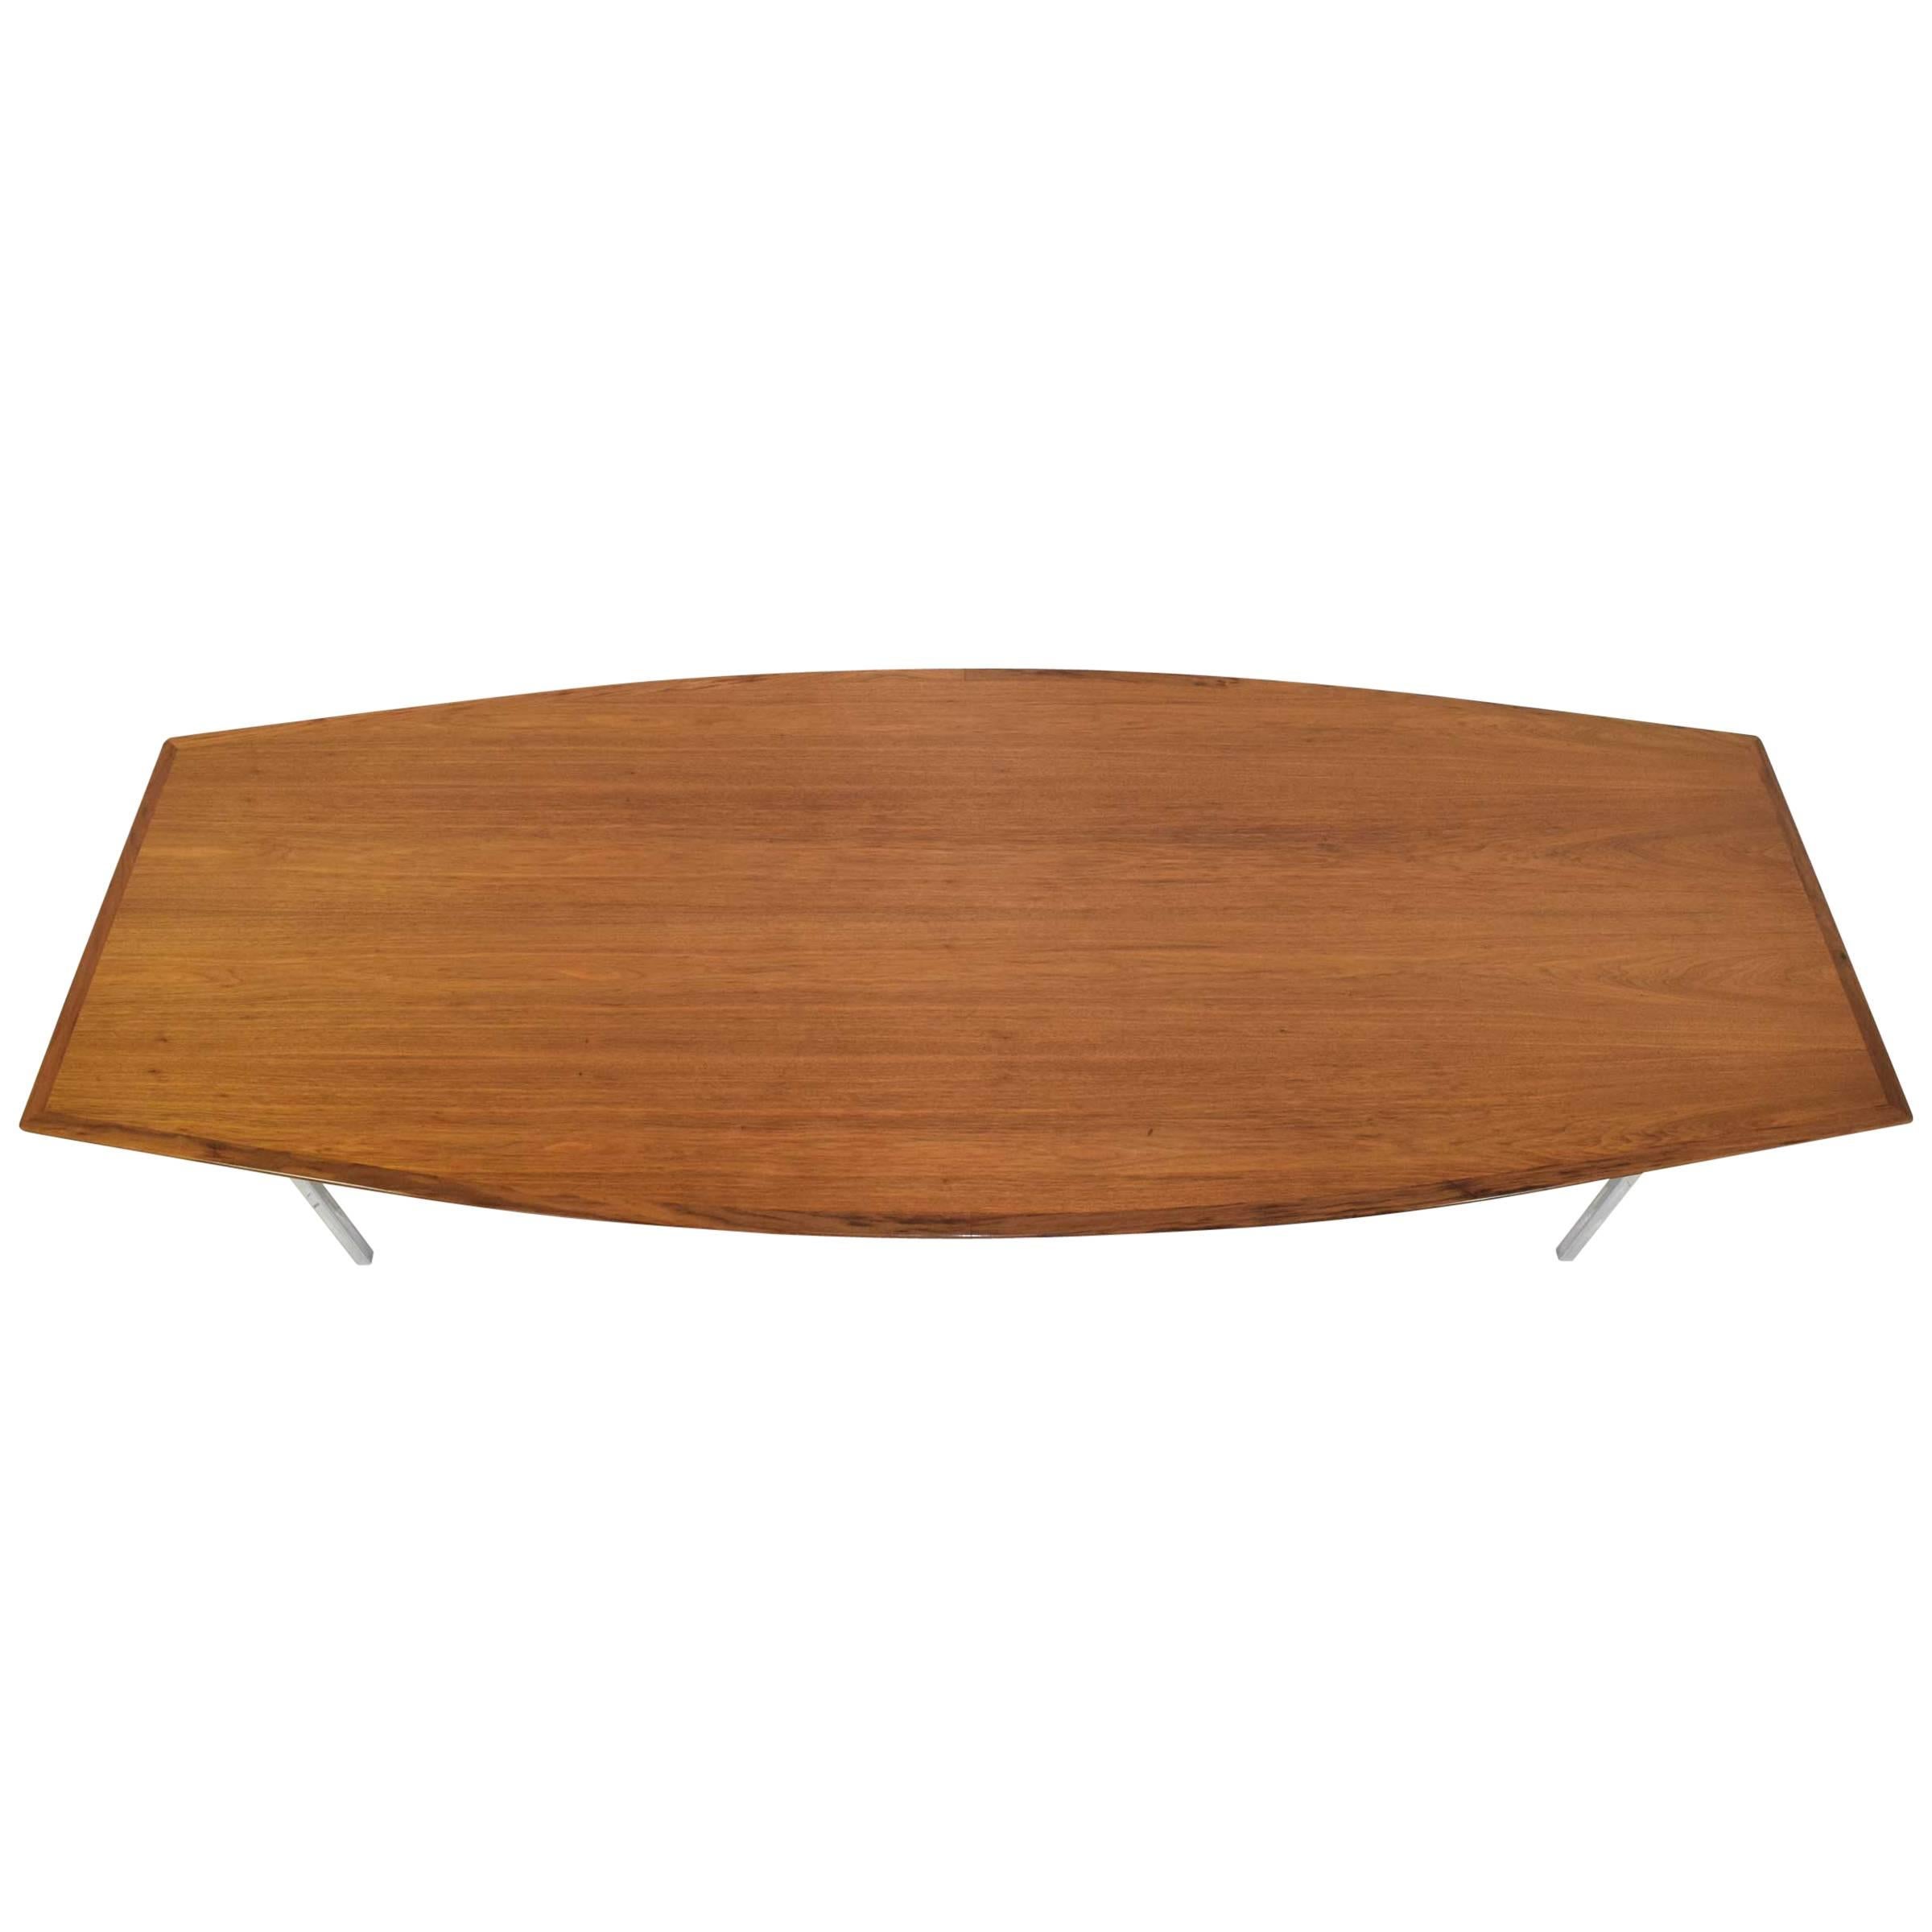 Florence Knoll Boat Shaped Table in Maple